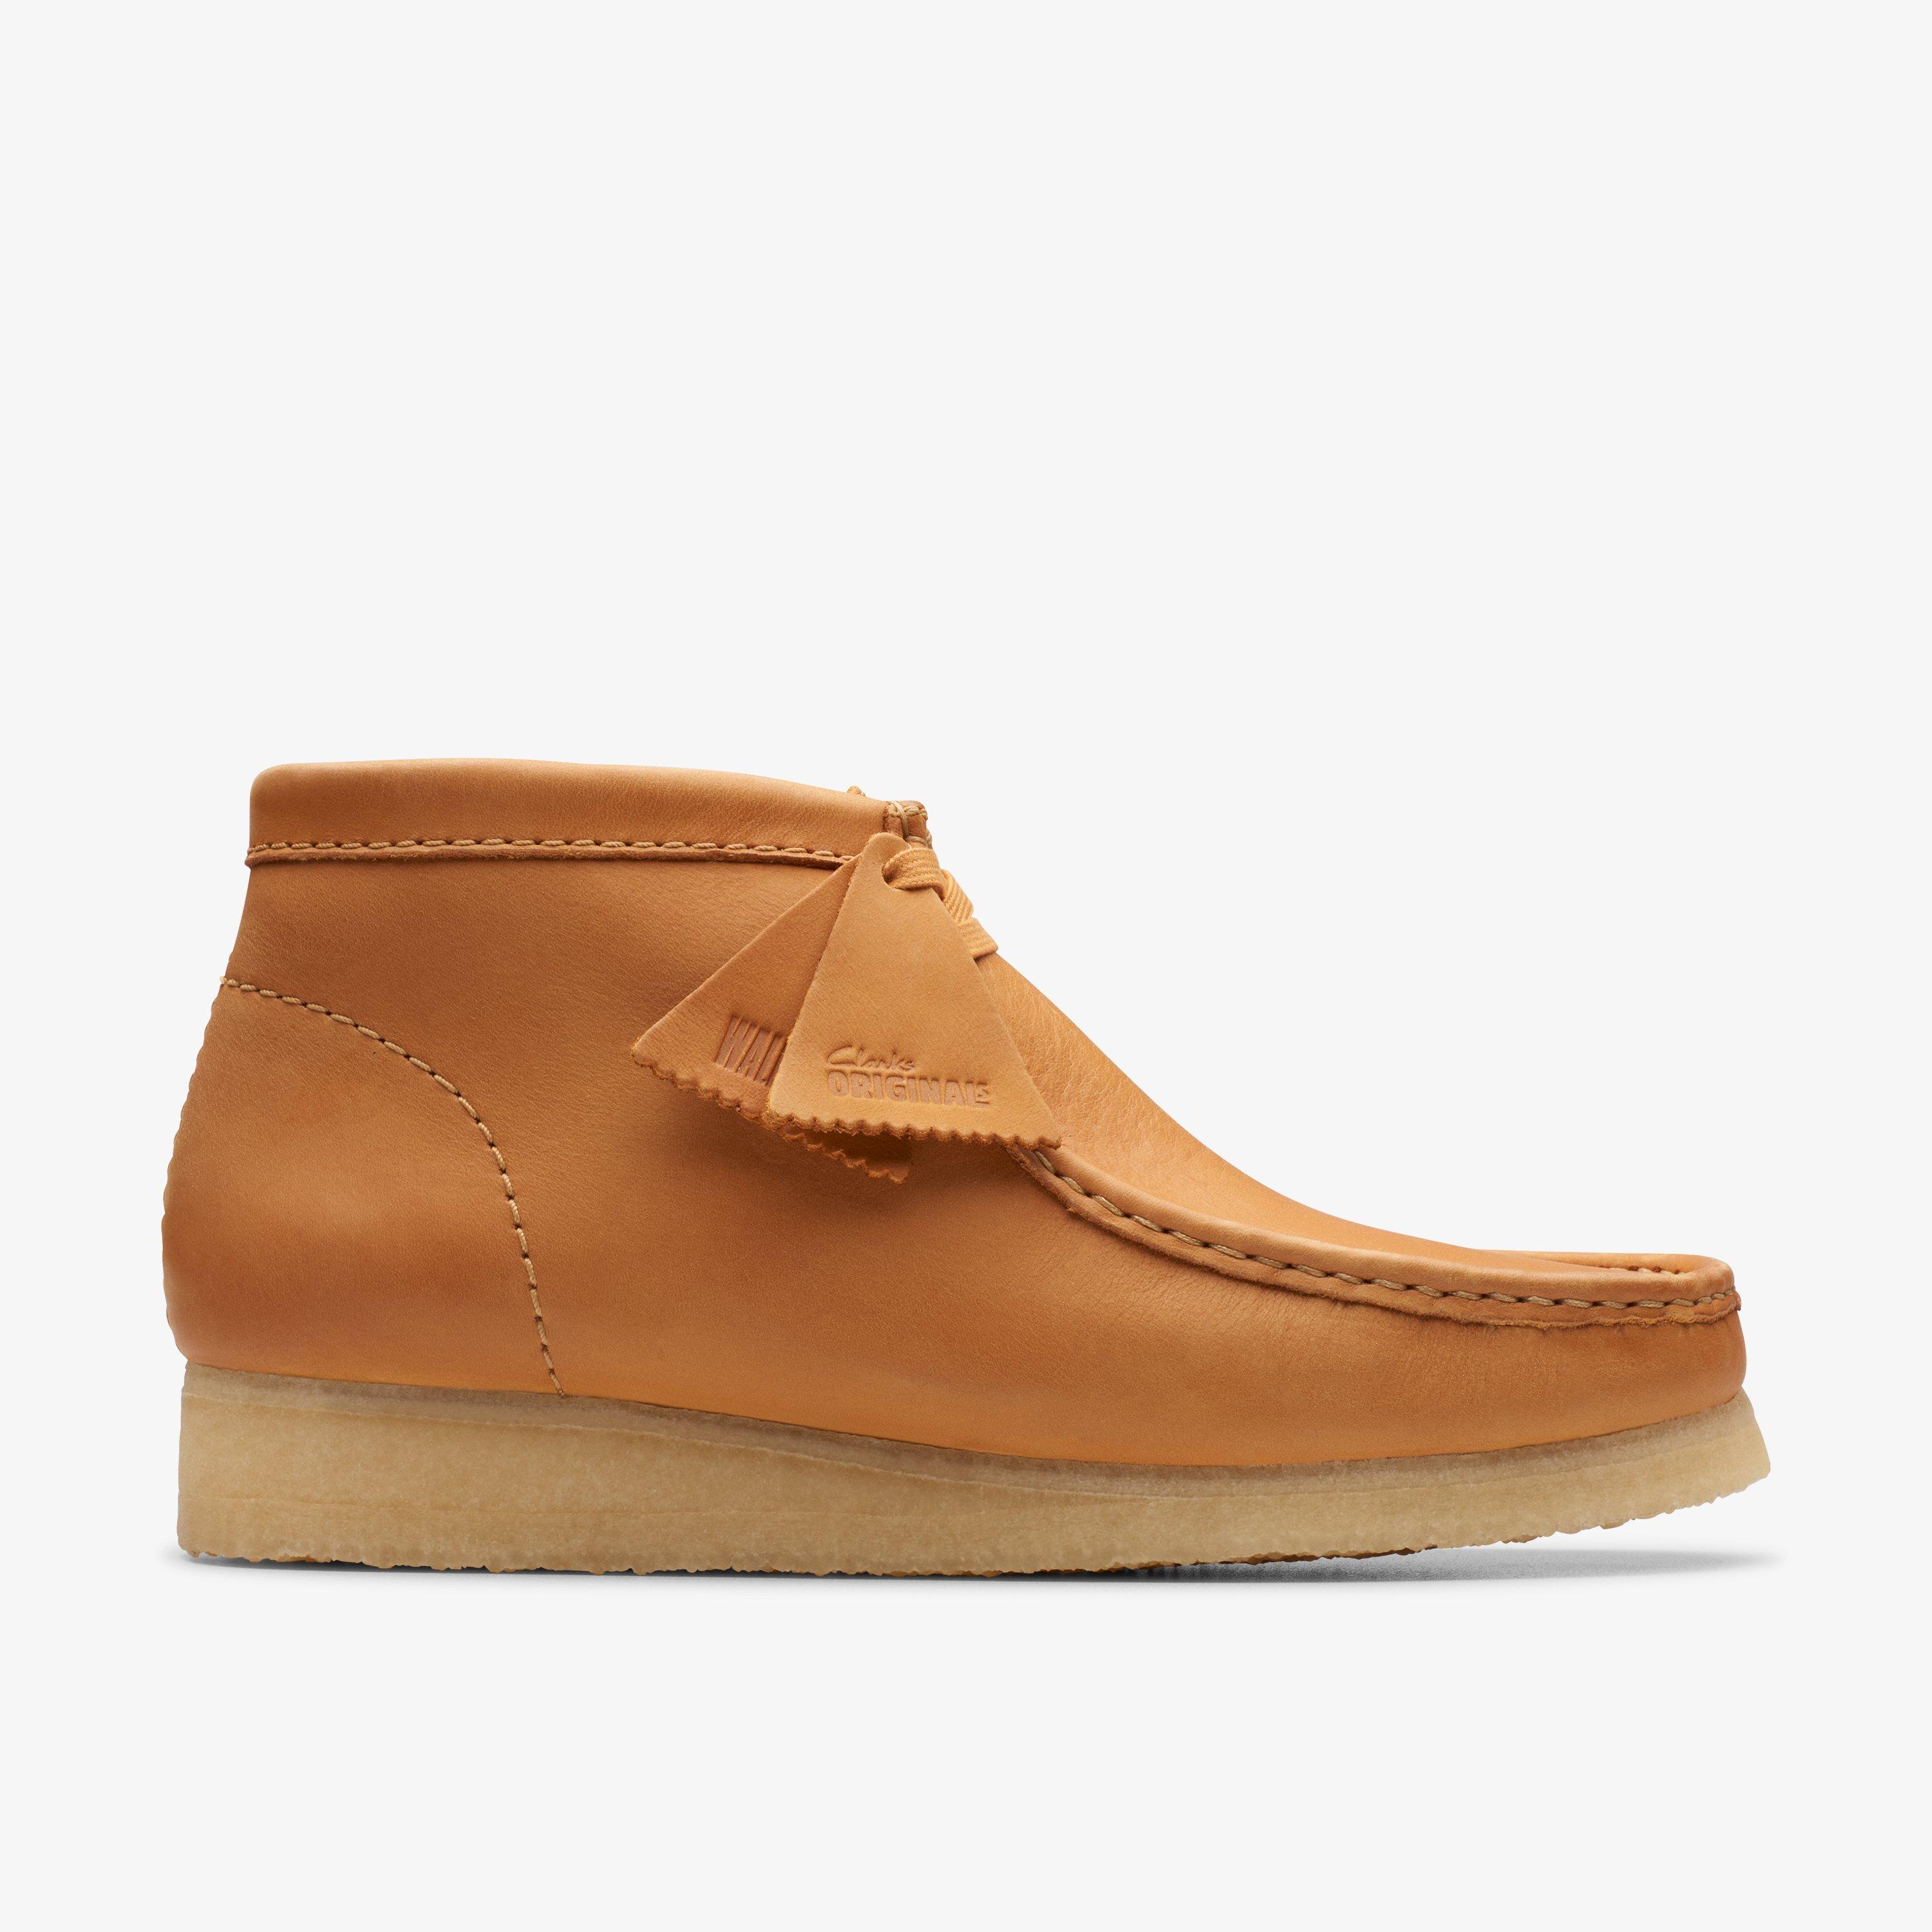 Clarks - Wallabees  Mens casual leather shoes, Casual leather shoes, Clarks  wallabees